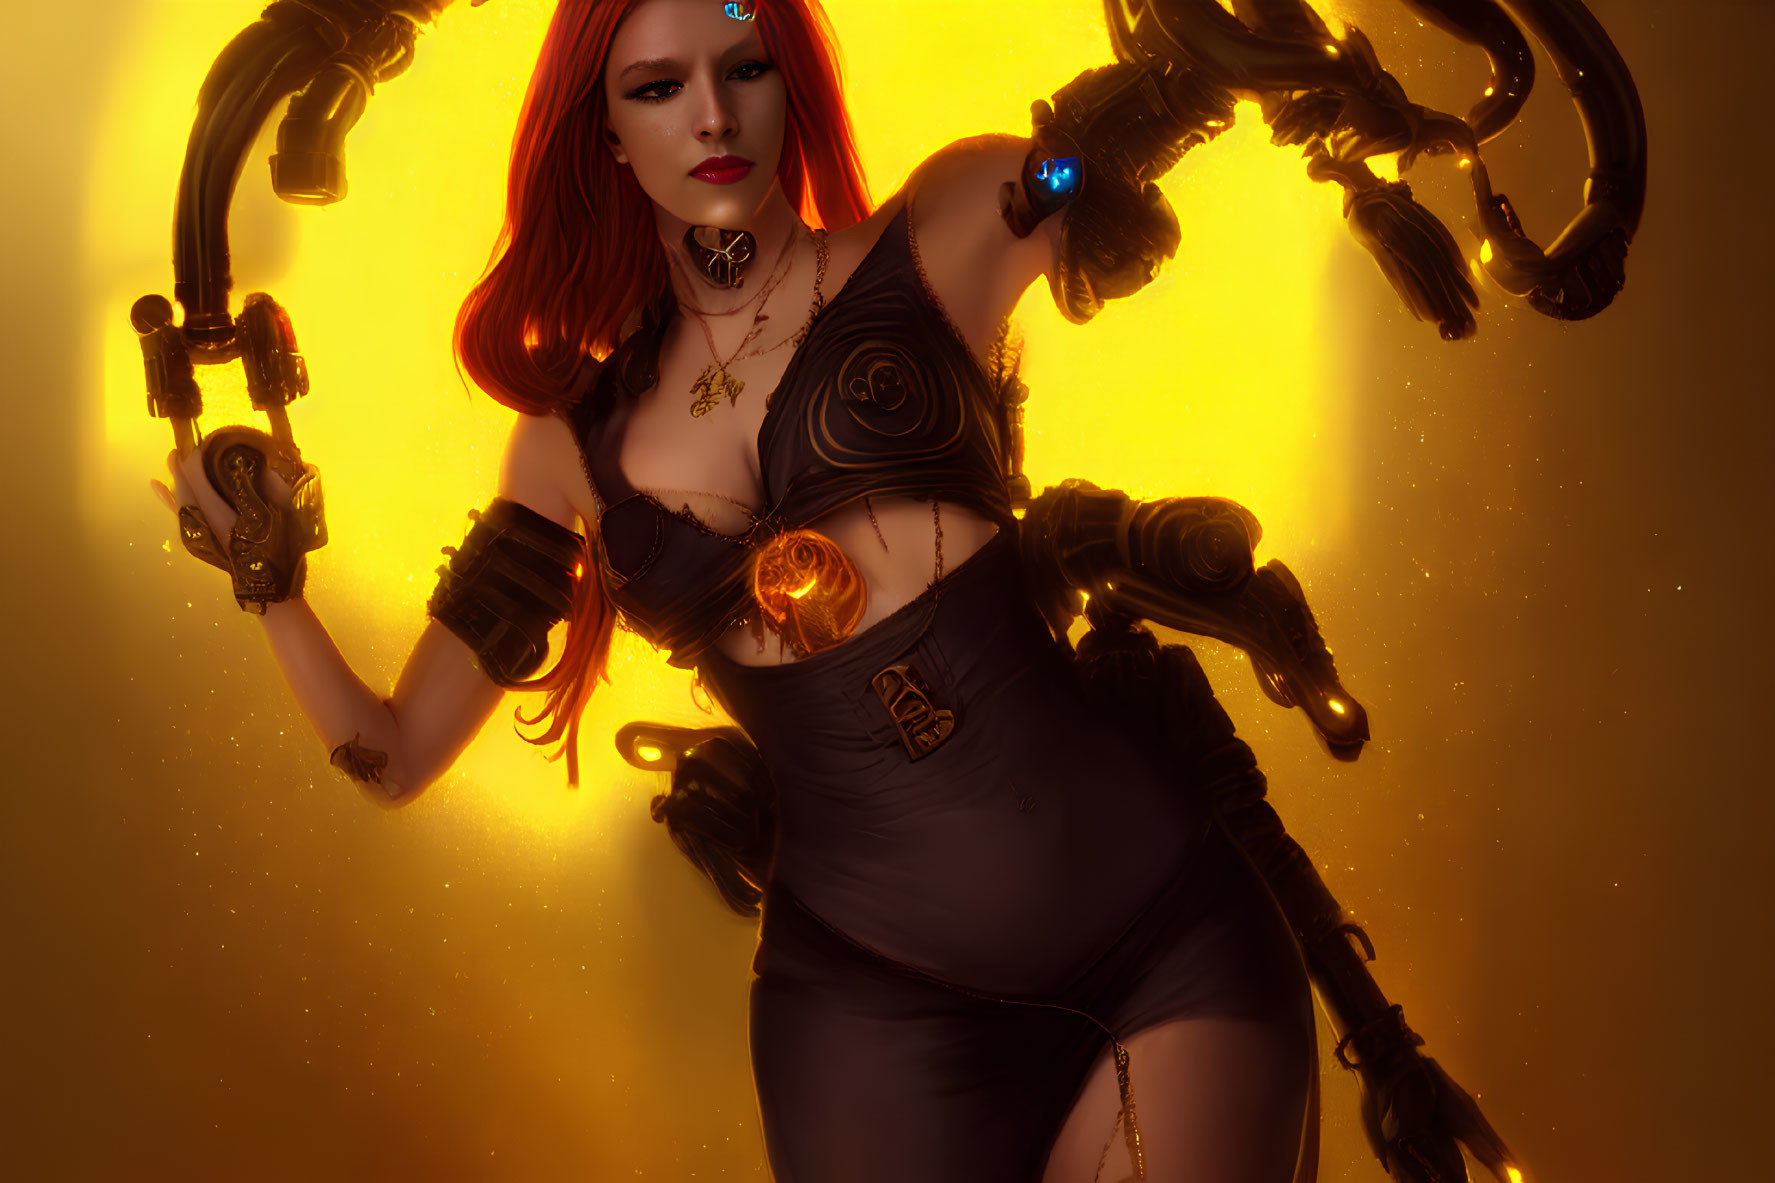 Stylized image of woman with red hair and cybernetic arms in futuristic setting